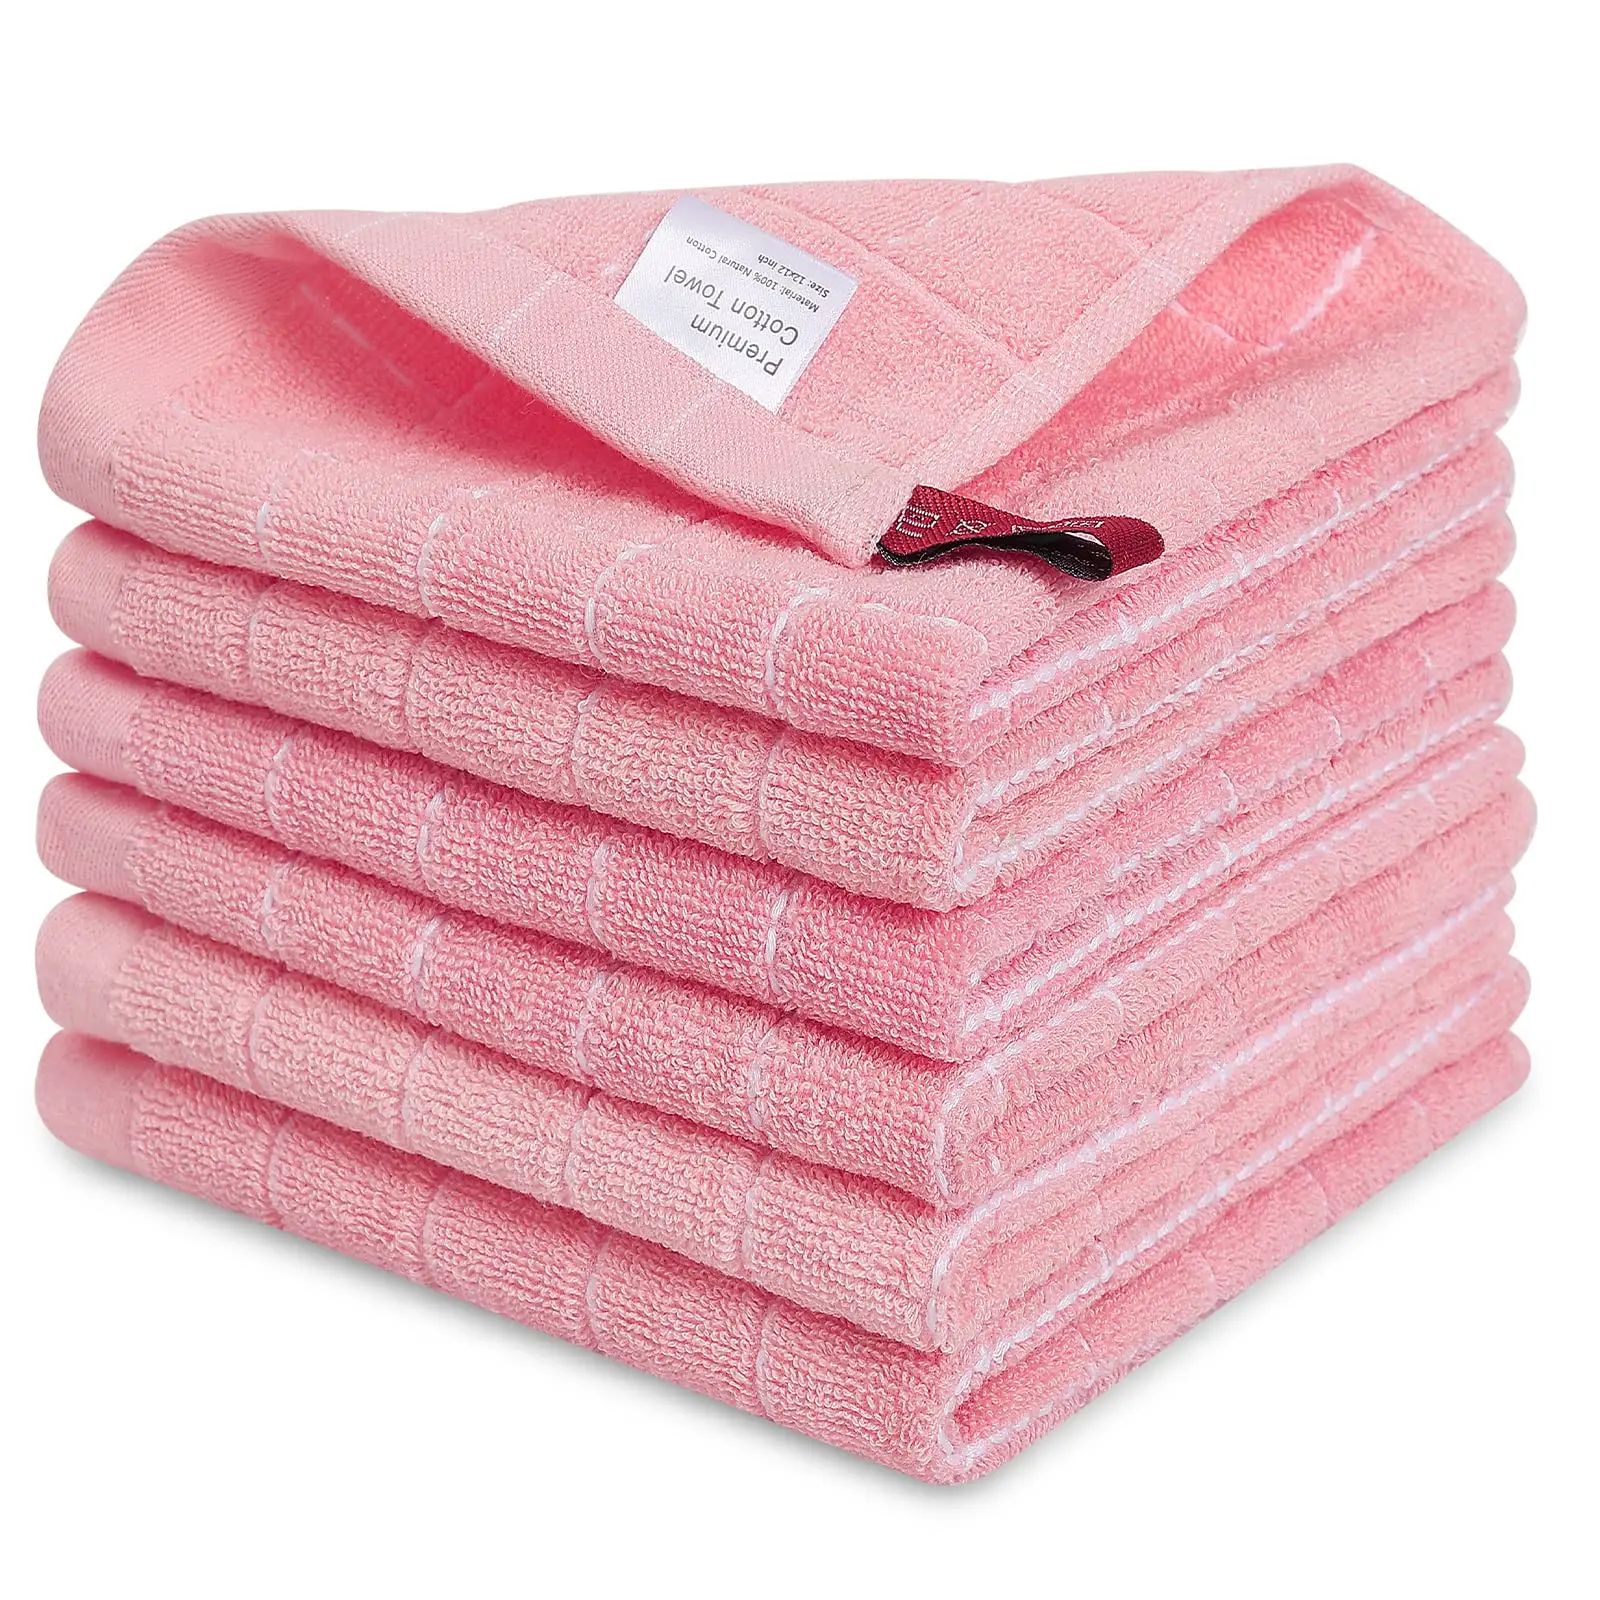 https://ae01.alicdn.com/kf/S703d7ecc99dc4e658ce42091e17a30a0c/Homaxy-Cotton-Kitchen-Towel-Super-Absorbent-Dishcloth-Home-Cleaning-Products-Rags-For-Kitchen-Cloths-Tools-Drying.jpg